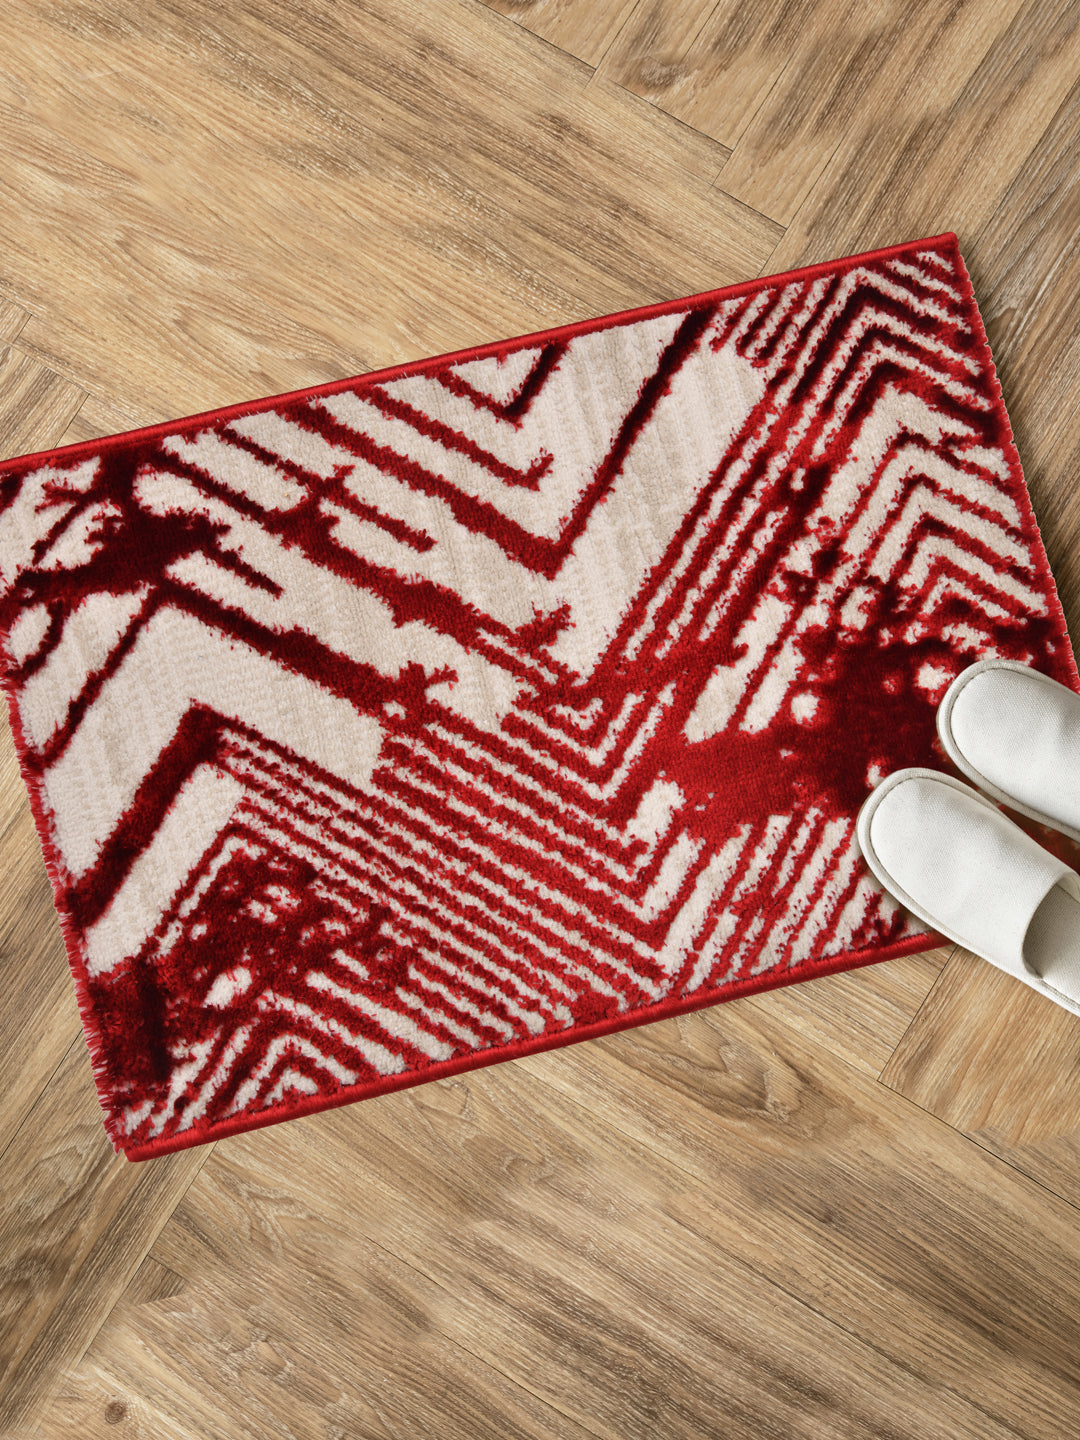 Doormat With Anti Skid Backing; 16x24 Inches; Maroon Beige Abstract